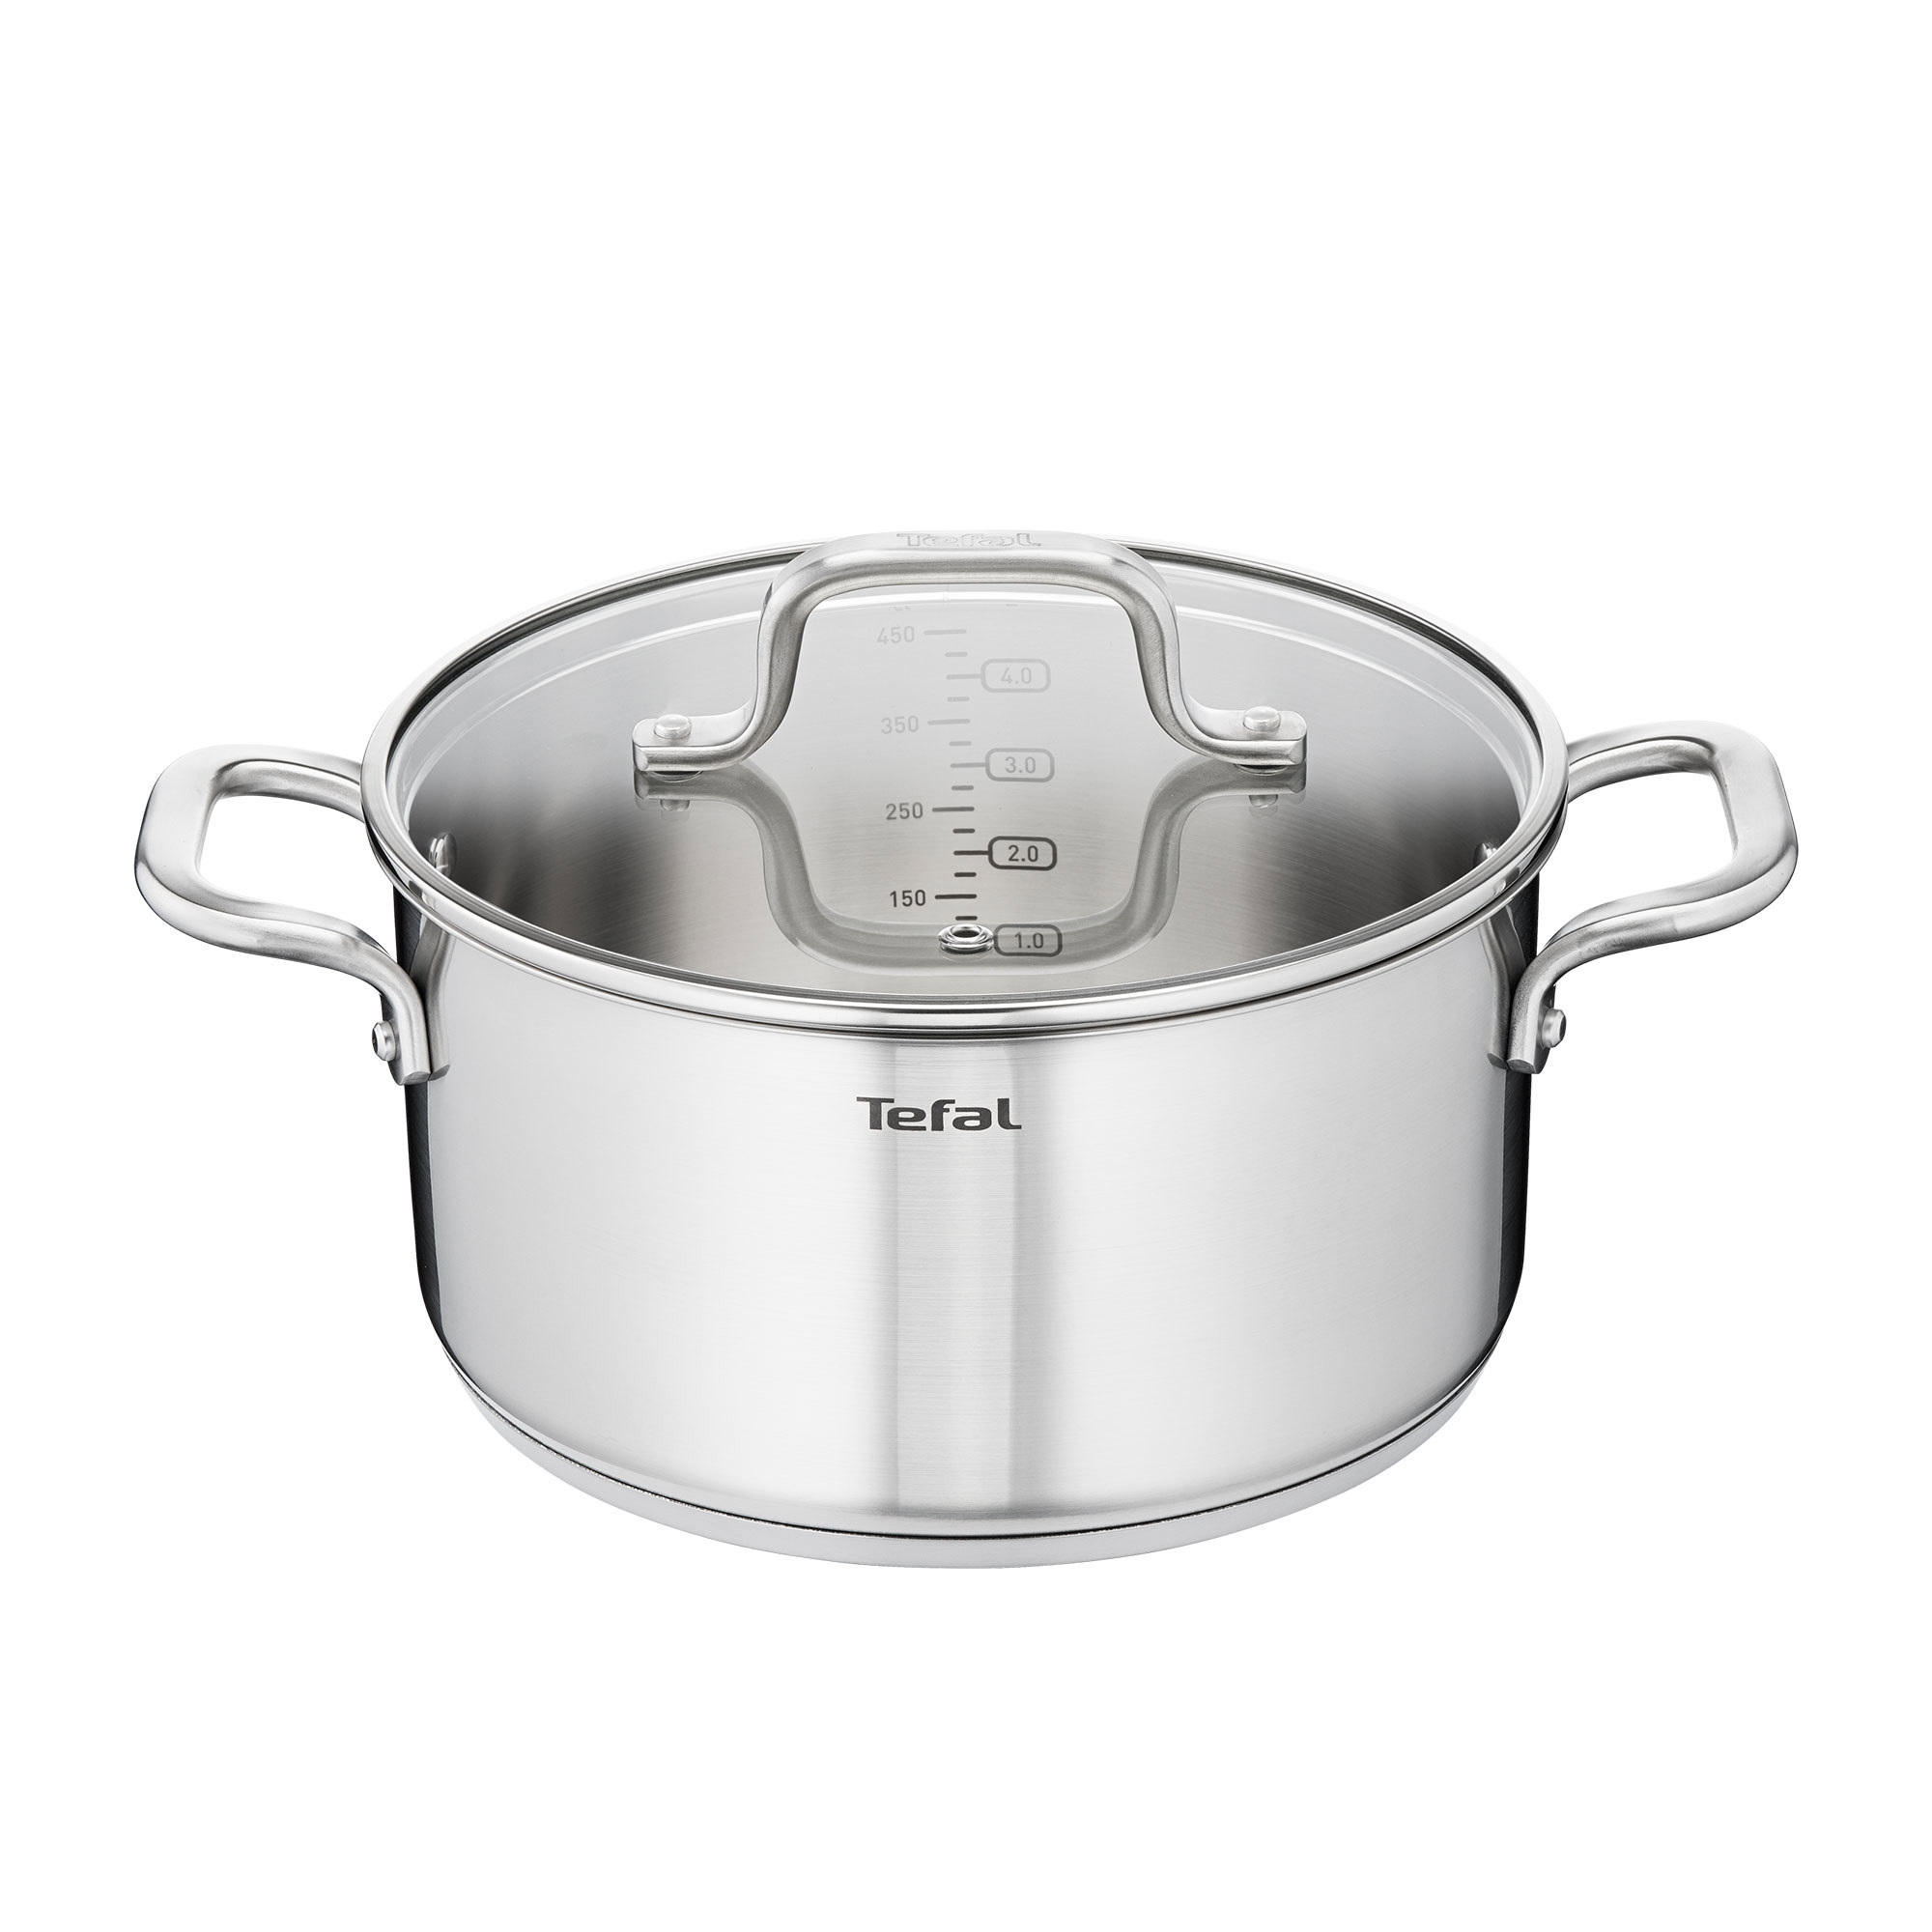 Tefal Virtuoso Stainless Steel Stewpot 24cm - 5.4L Image 1